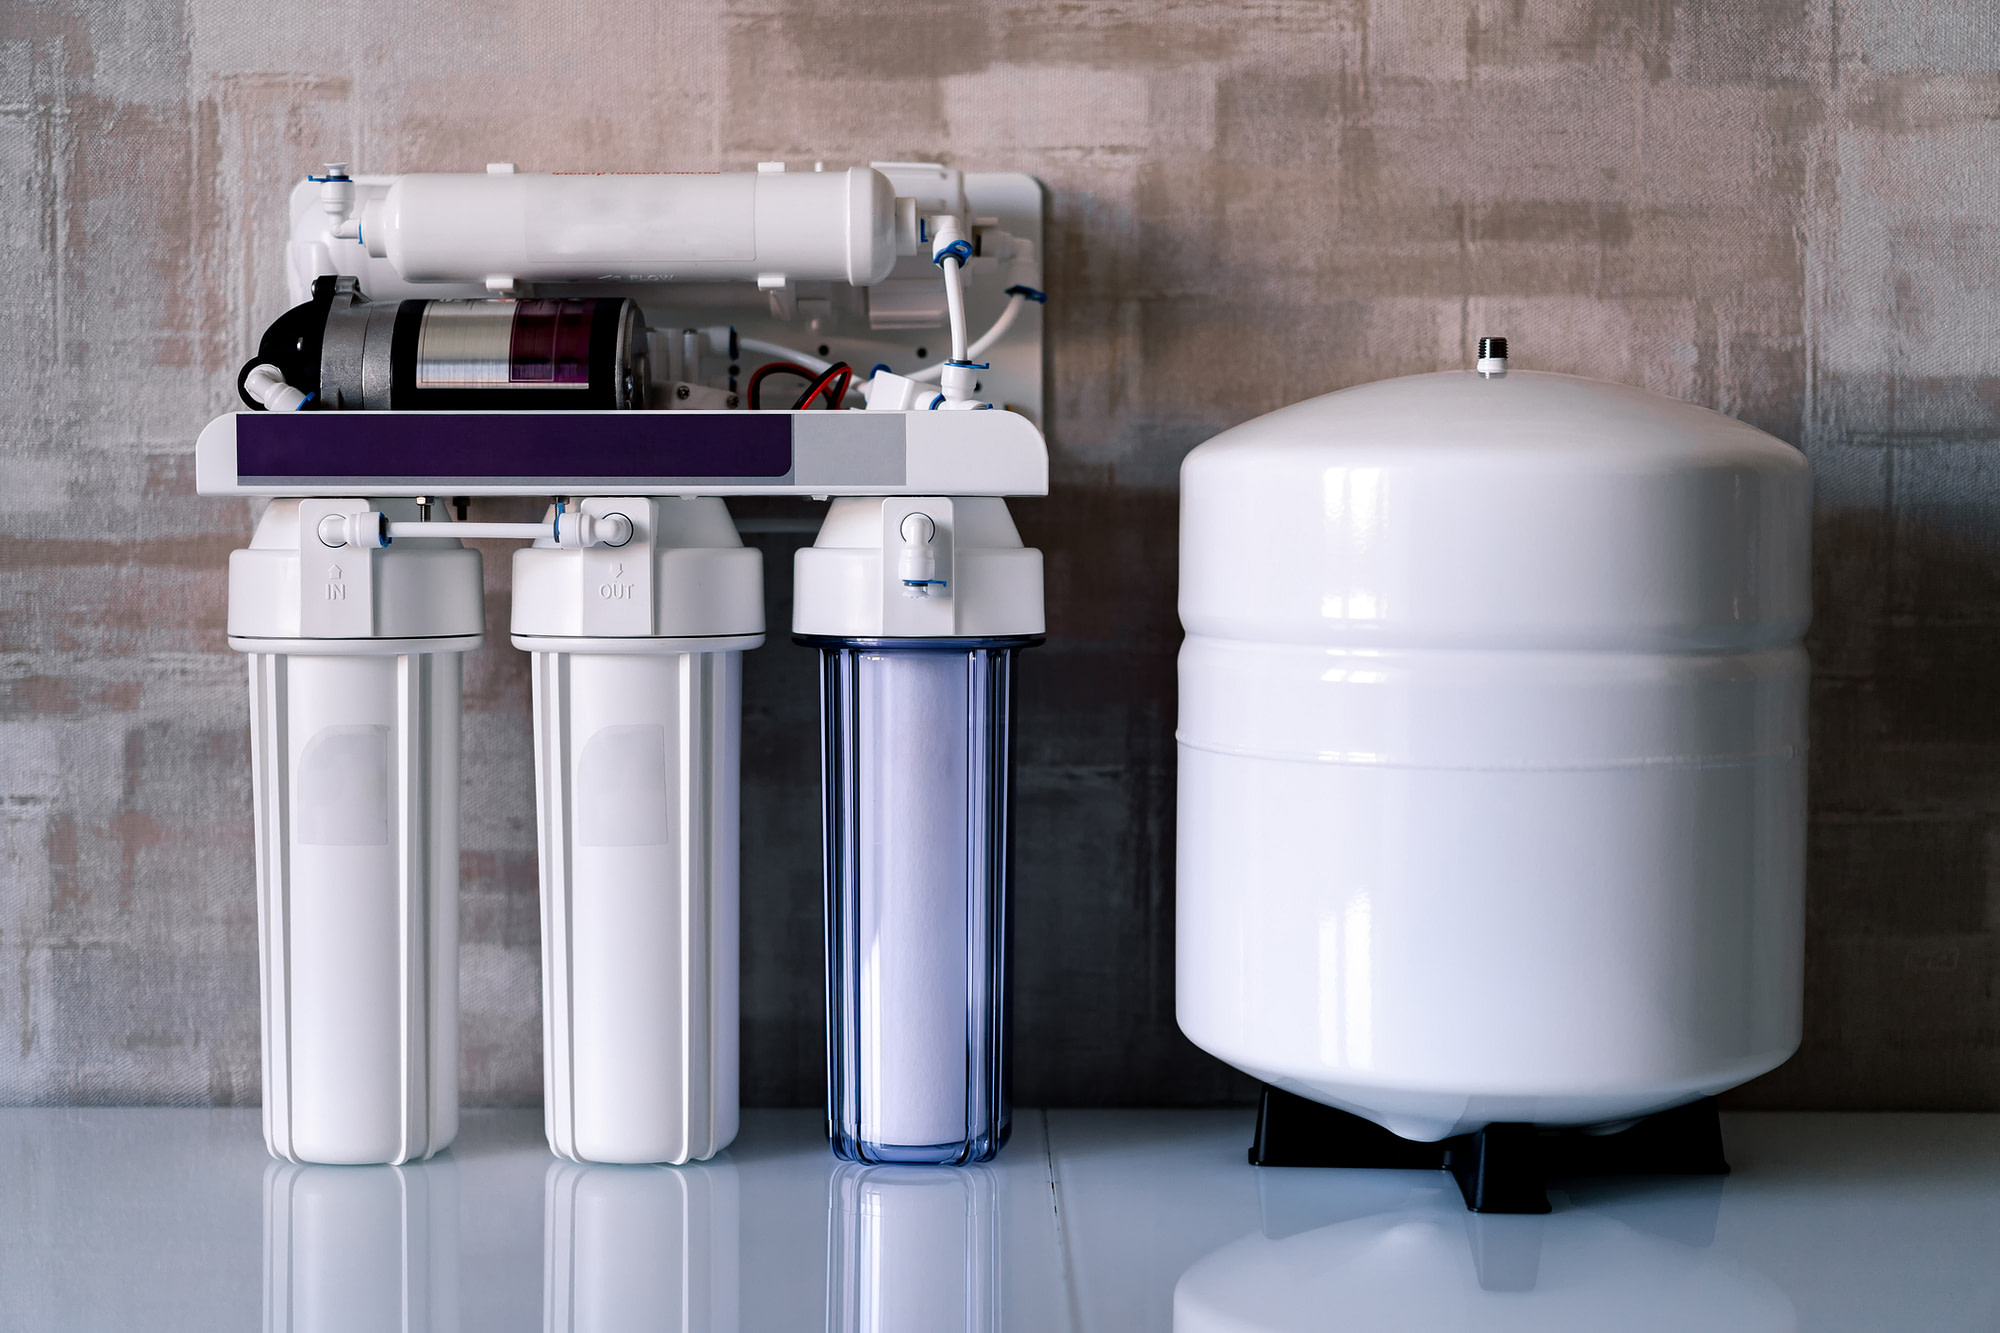 Reverse osmosis water purification system at Riverside CA home